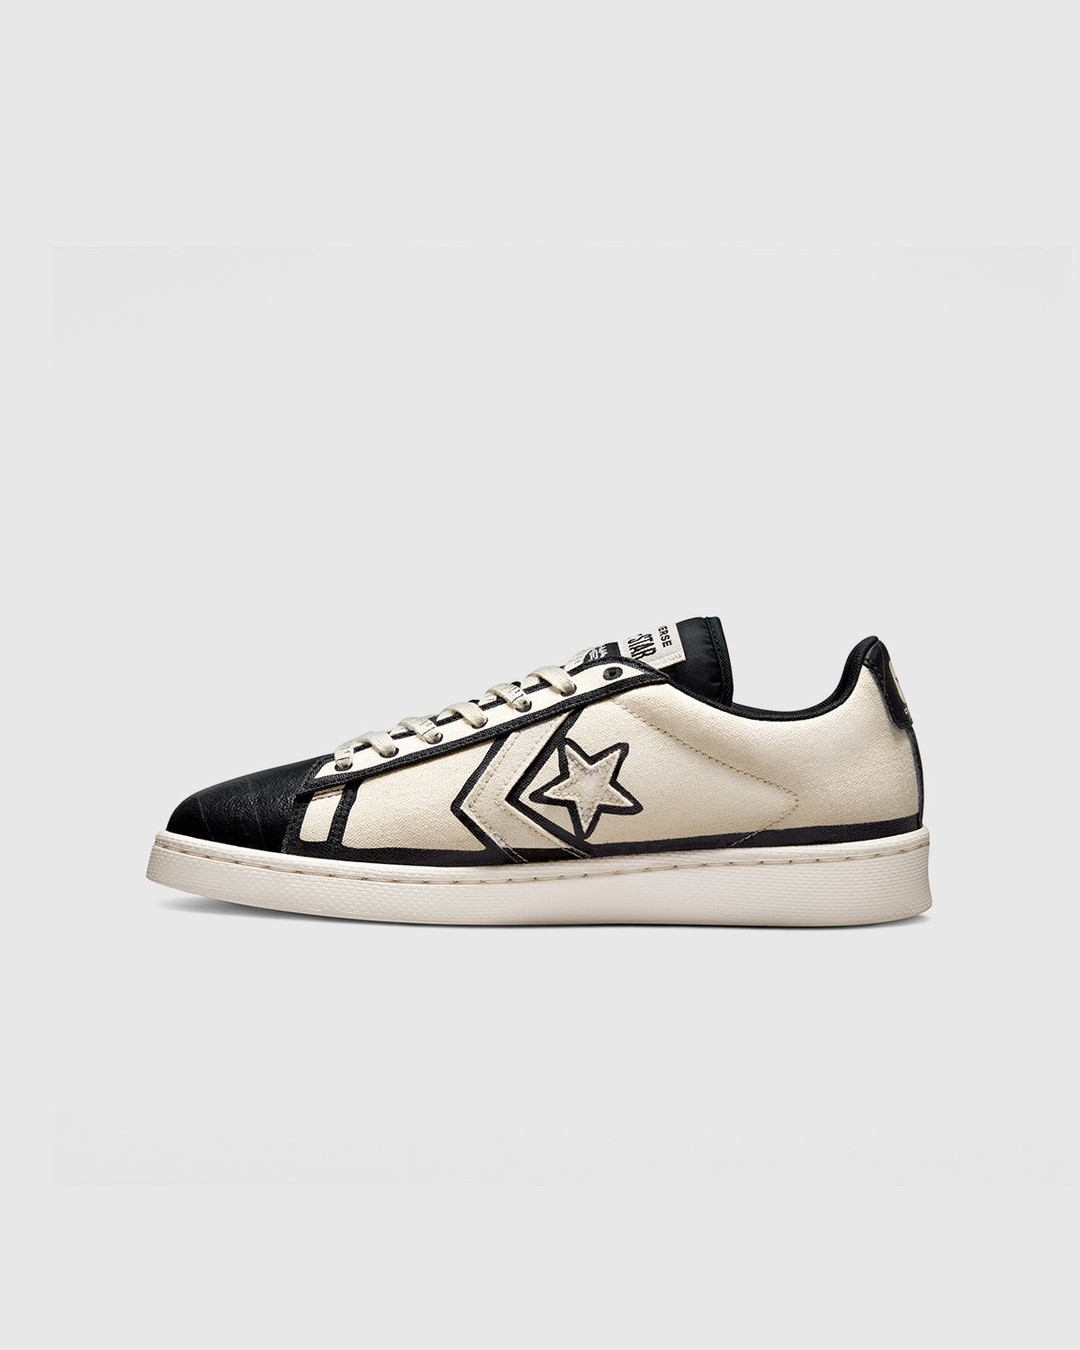 Converse x Joshua Vides – Pro Leather Ox Natural Ivory/Black/White - Low Top Sneakers - White - Image 2